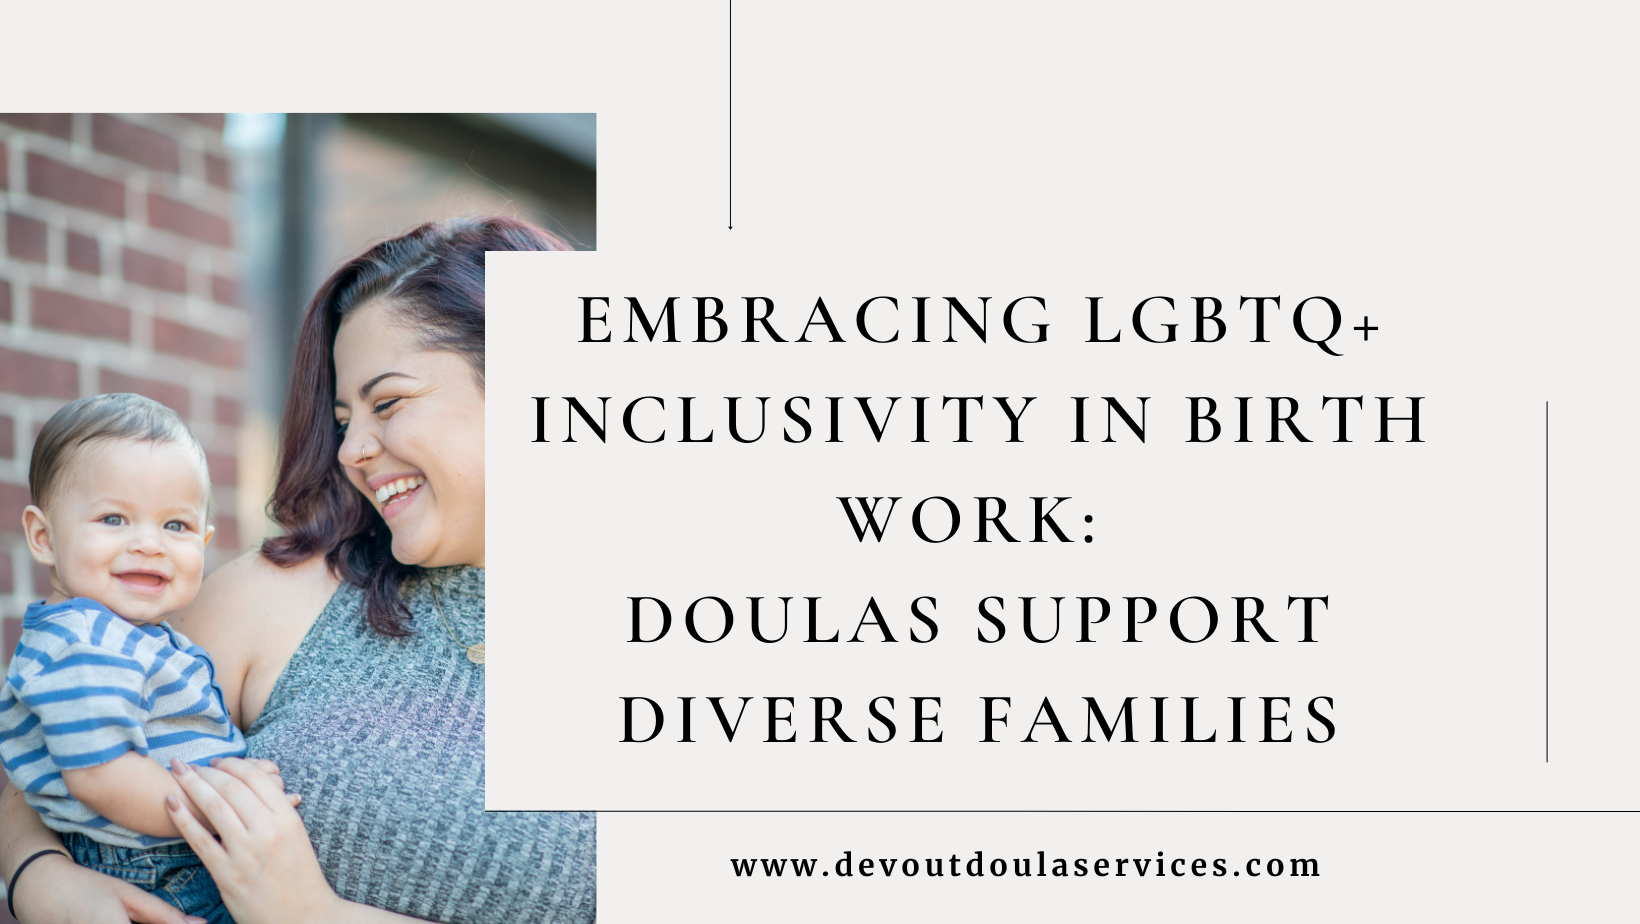 Woman holding baby that is approximately 6 months old. Text says Embracing LGBTQ+ Inclusivity in Birth Work:<br />
Doulas Support Diverse Families